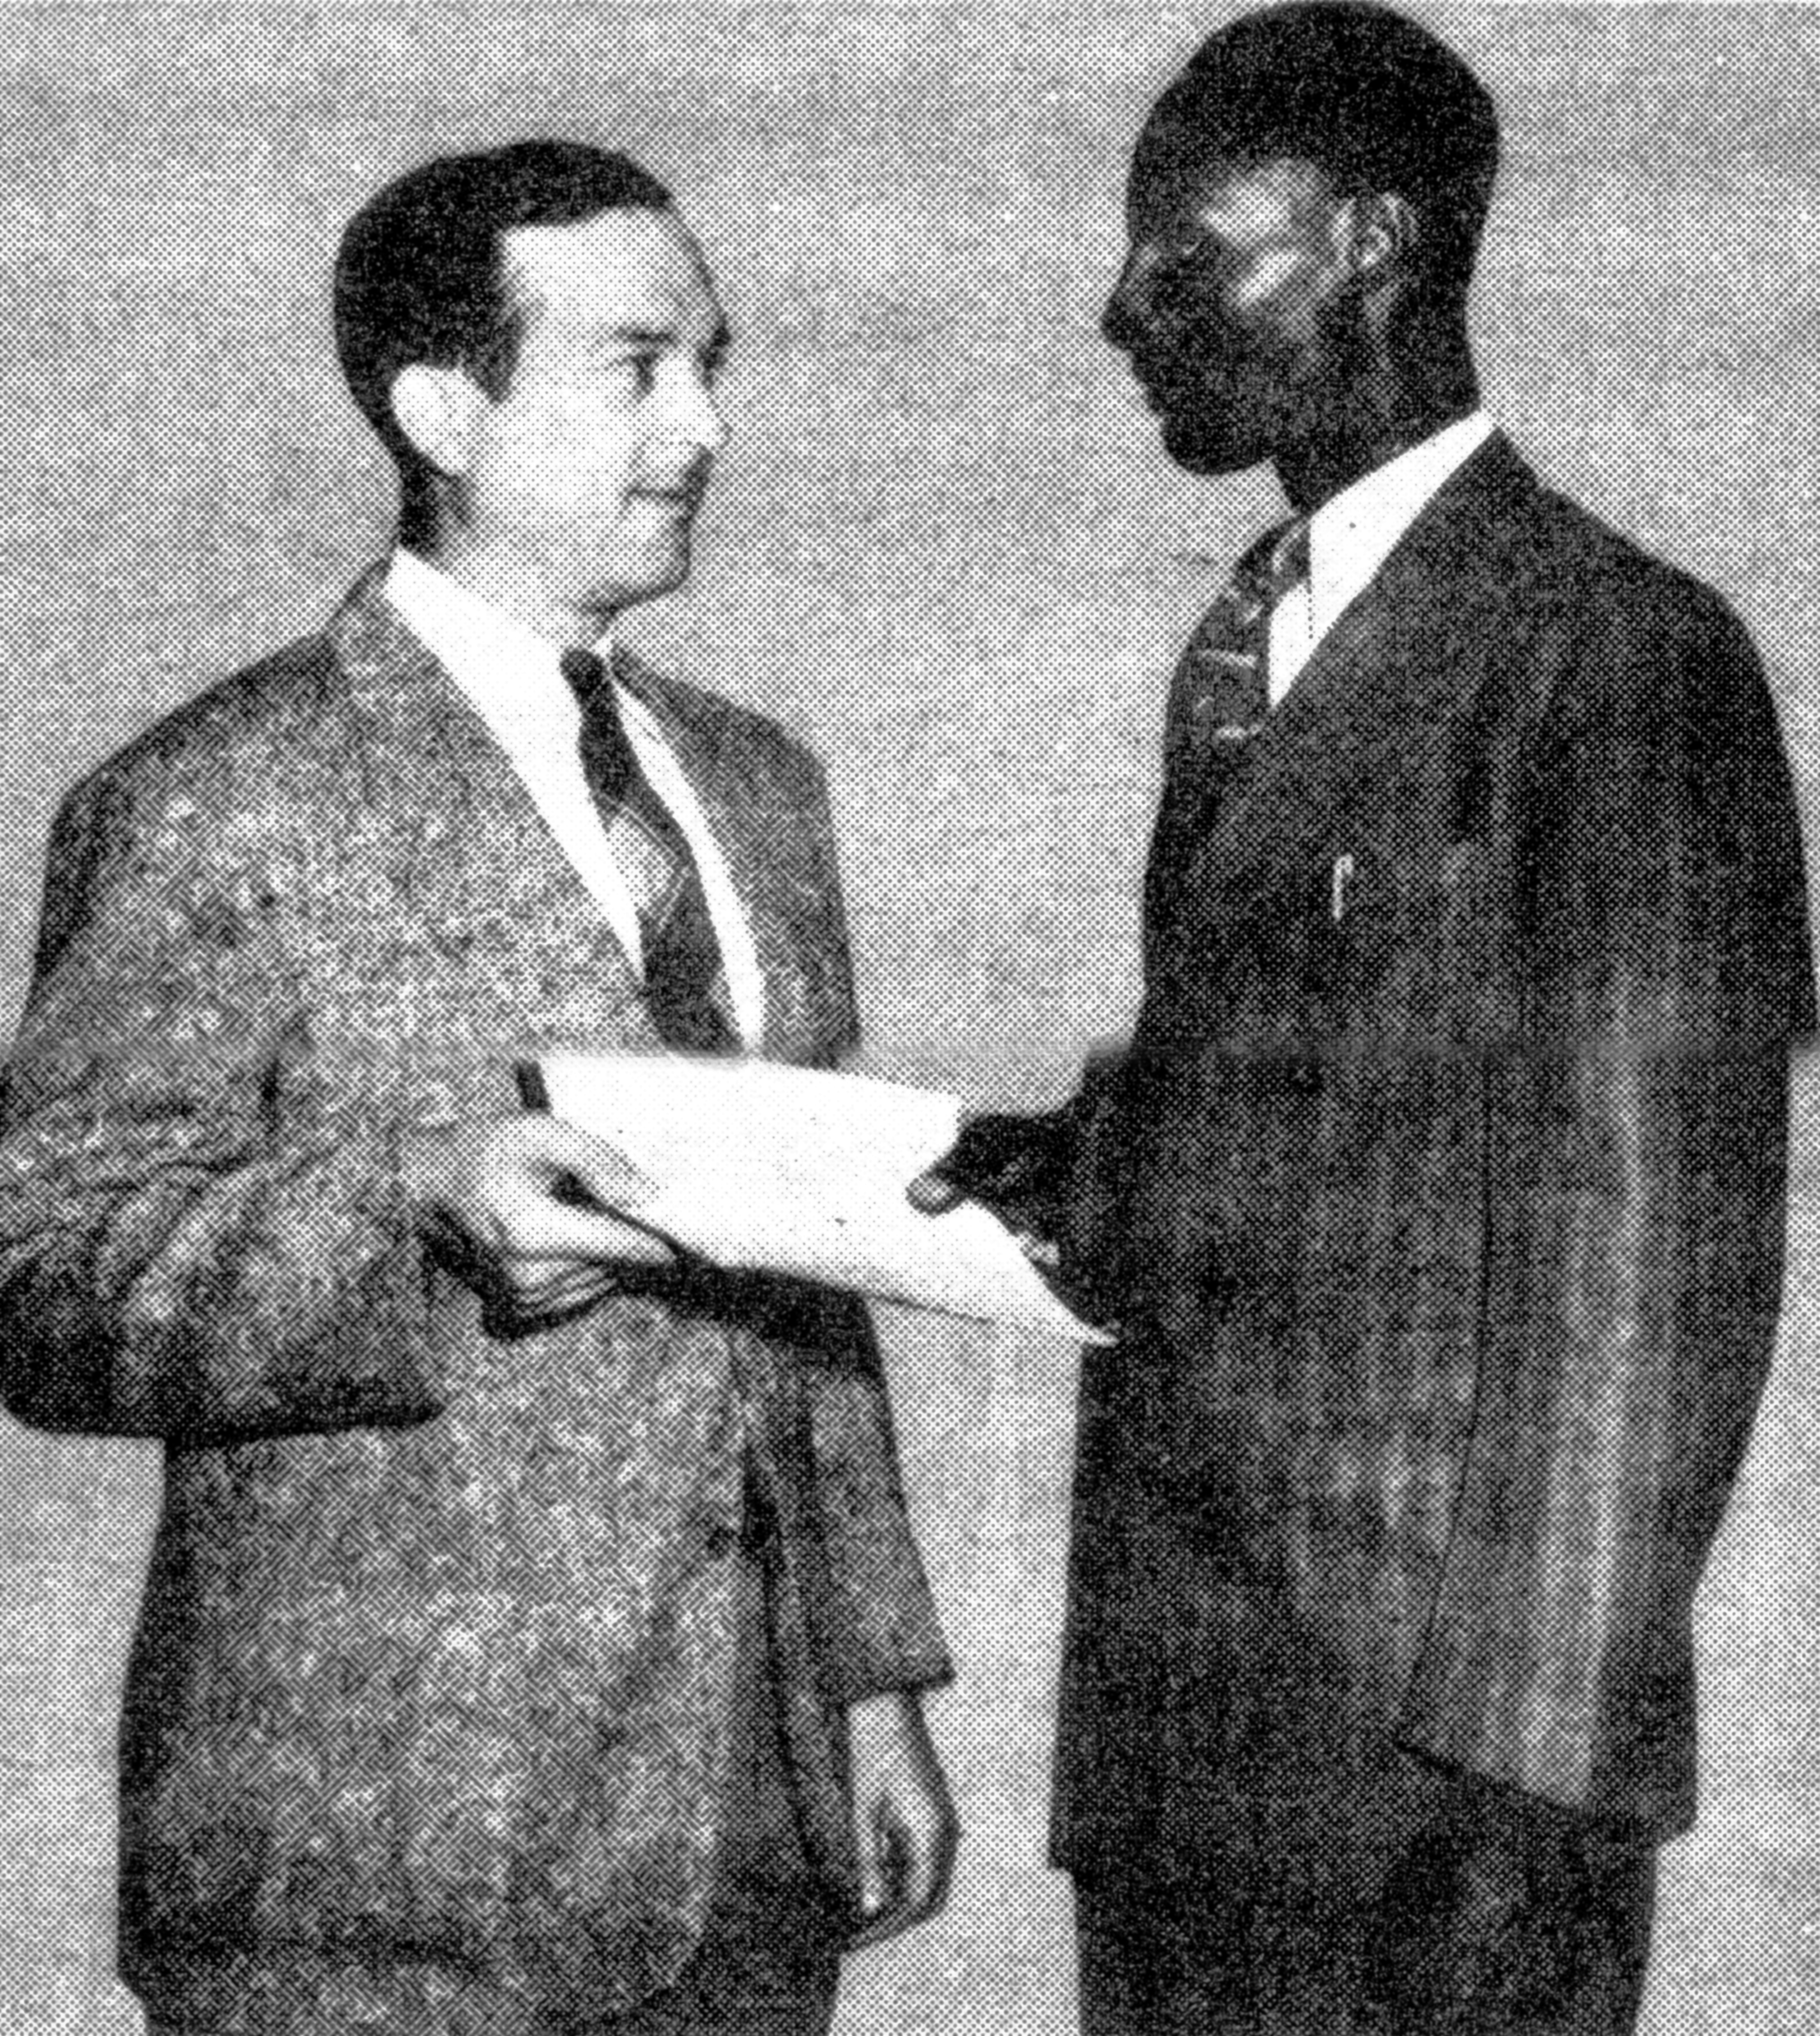 a photo of George Rusten in a suit receiving an award from his boss wearing a suit in 1949